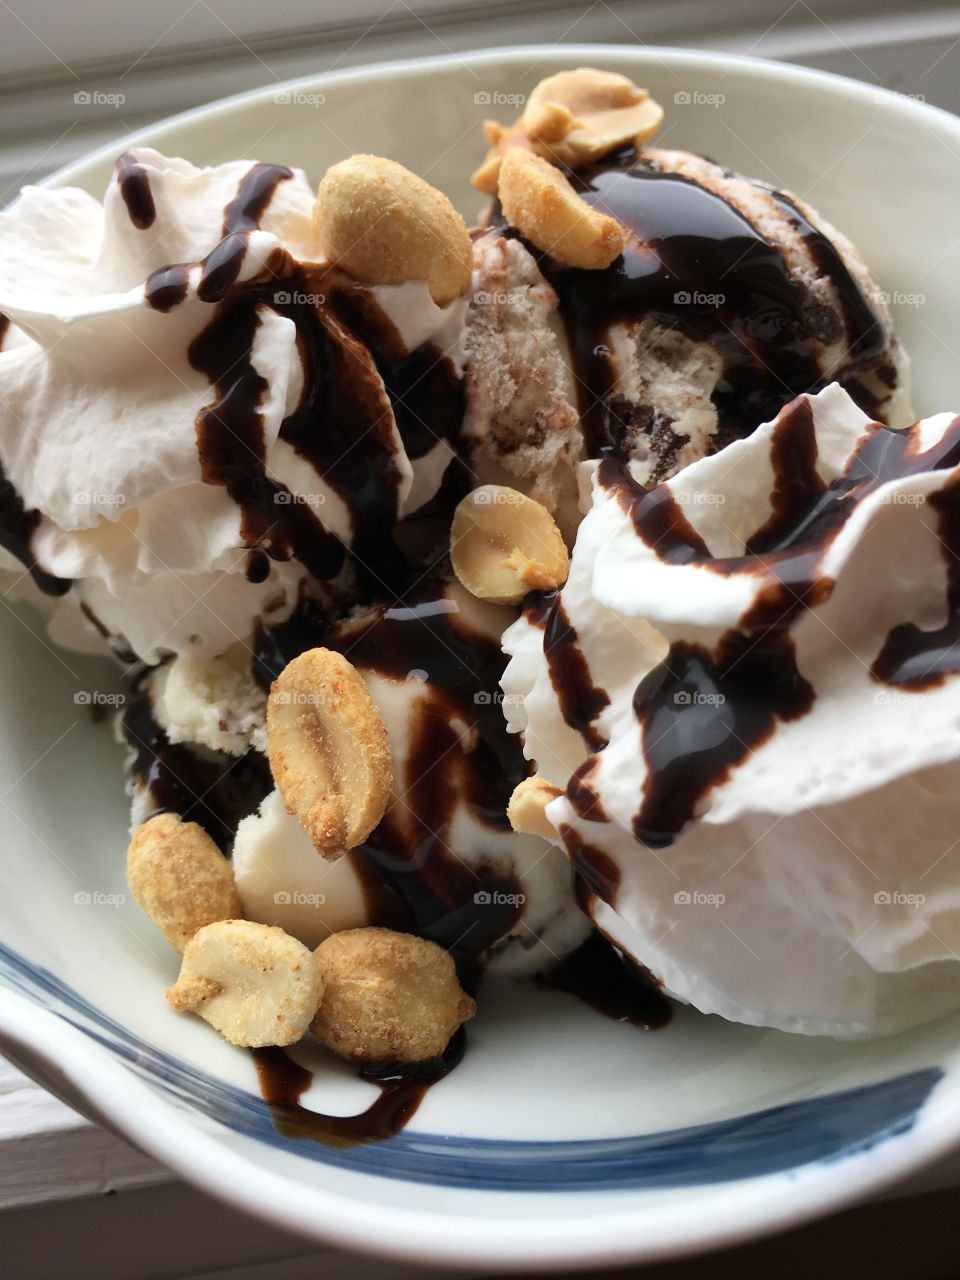 Chocolate drizzled over ice cream whip cream and peanuts. 